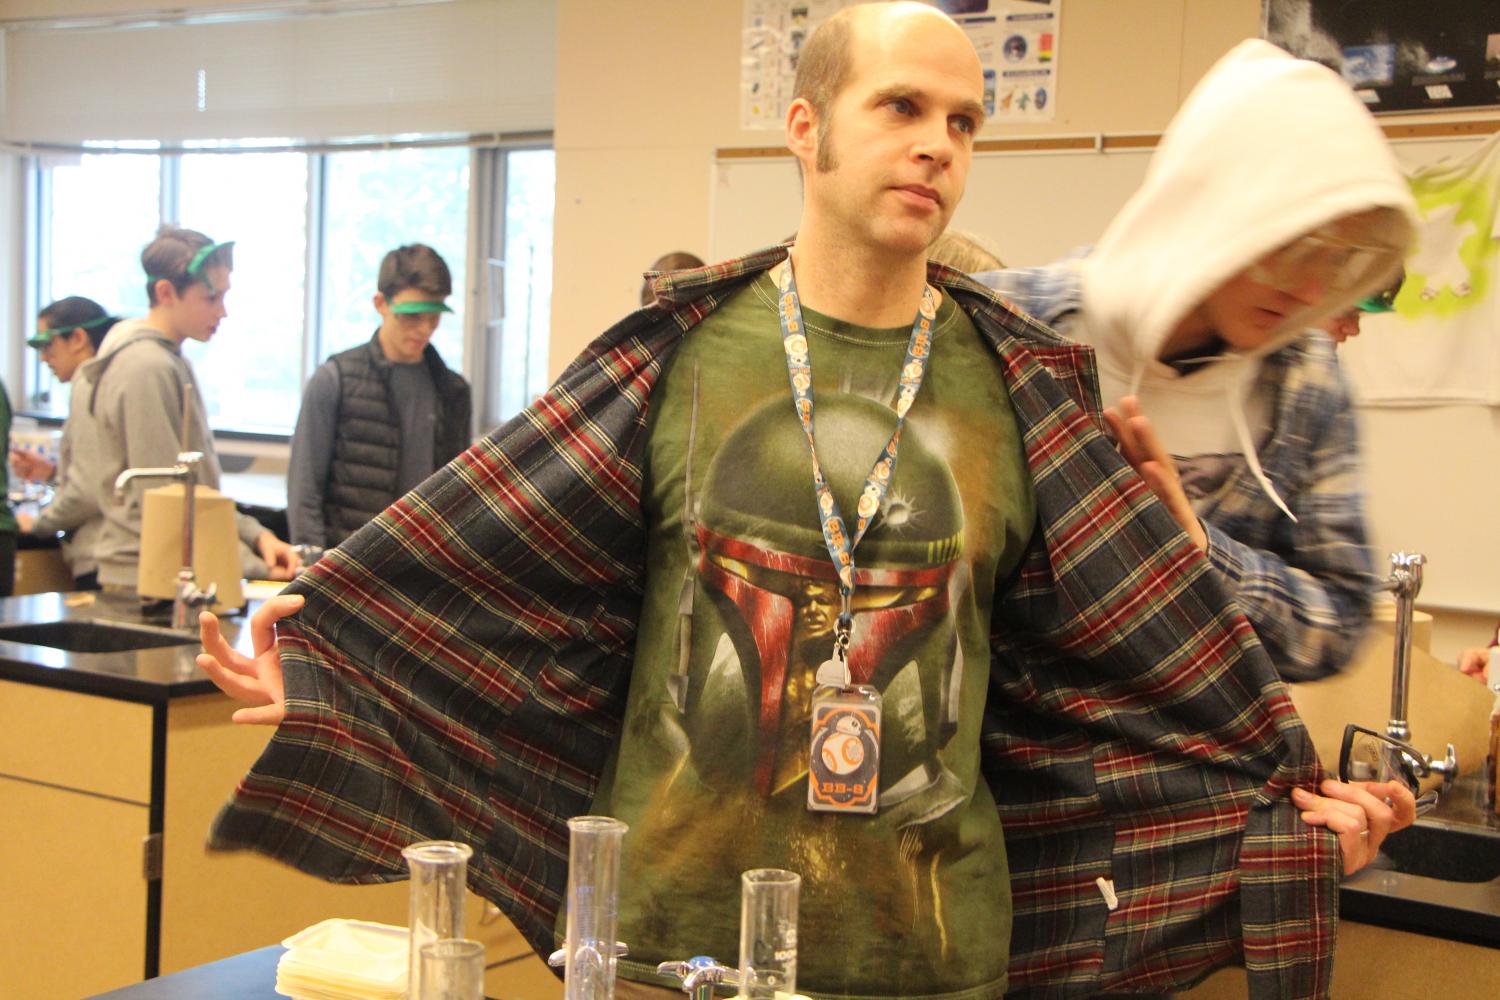 Showing off his Star Wars Shirt. Steve Davala has a passion for his students, Chemistry and science fiction.